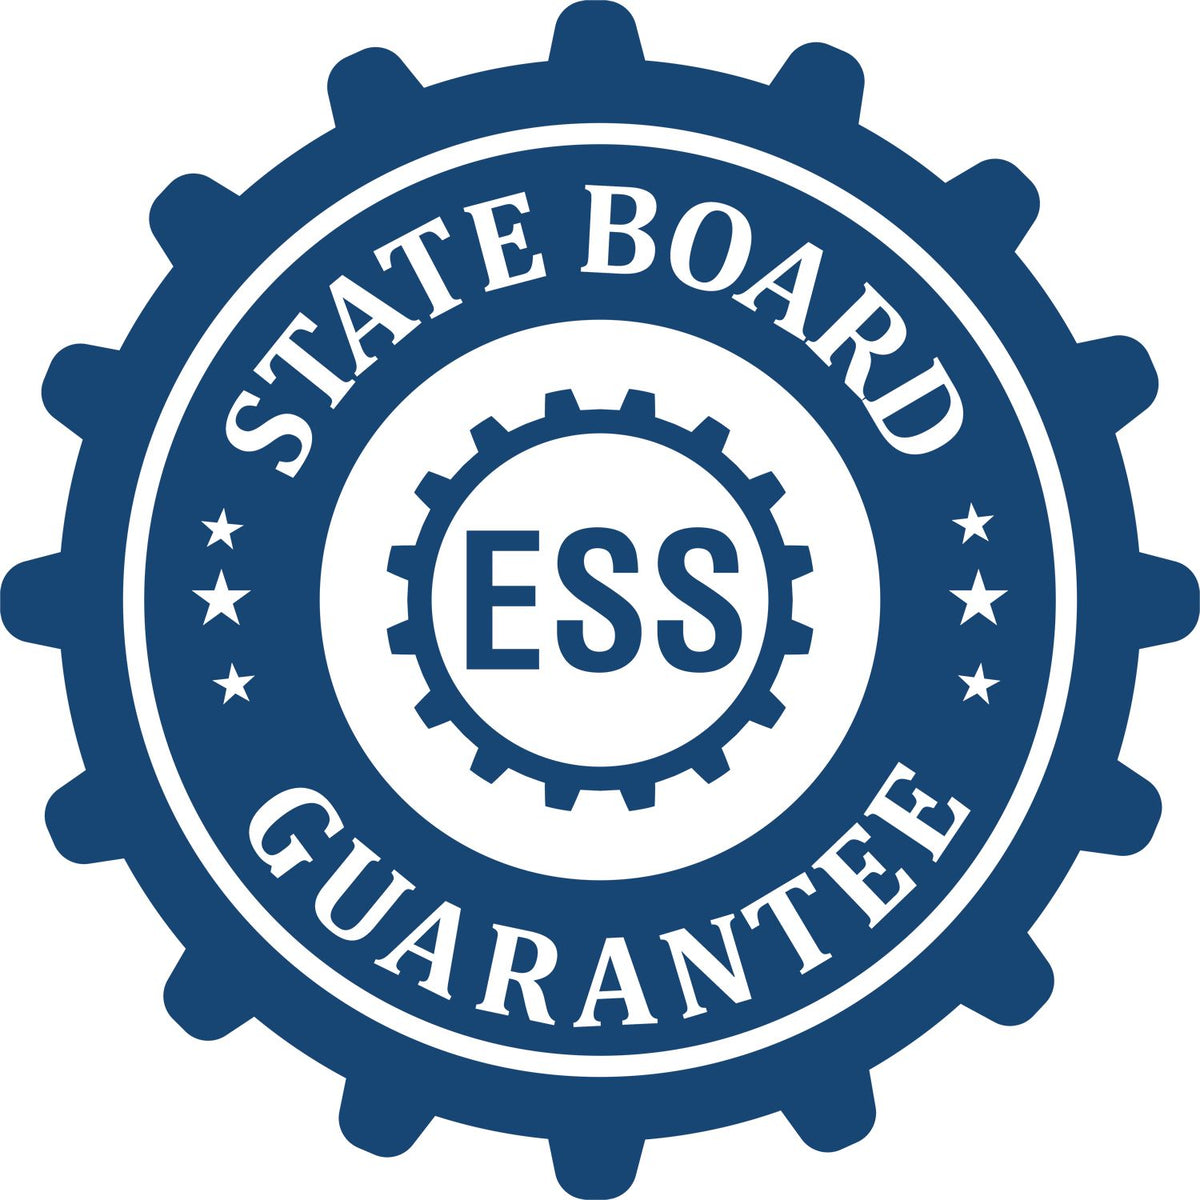 An emblem in a gear shape illustrating a state board guarantee for the Heavy-Duty Indiana Rectangular Notary Stamp product.